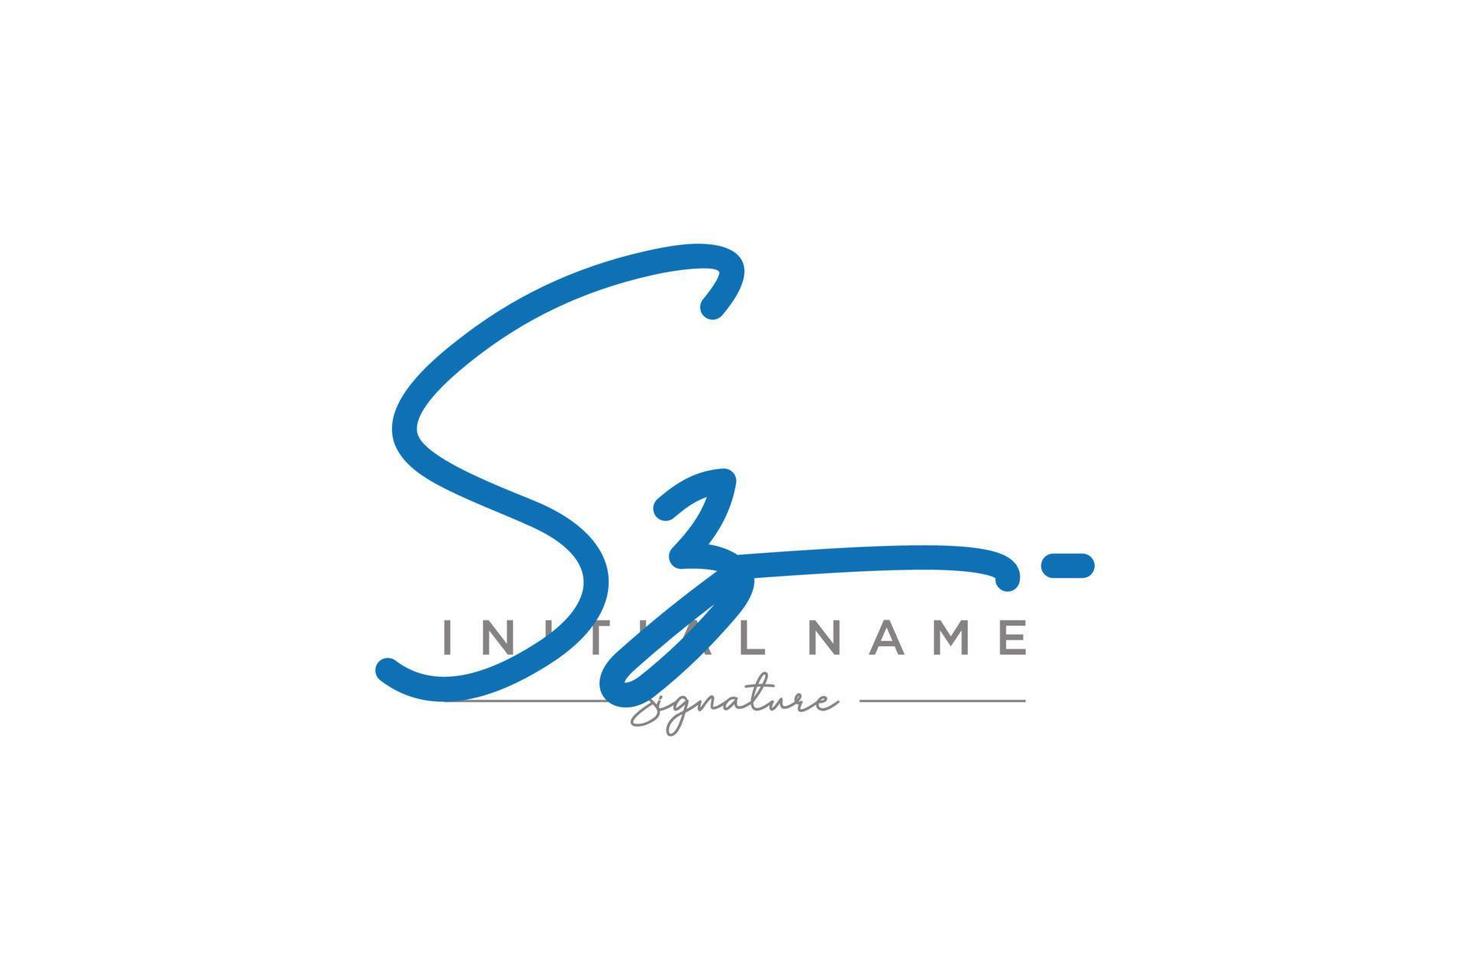 Initial SZ signature logo template vector. Hand drawn Calligraphy lettering Vector illustration.